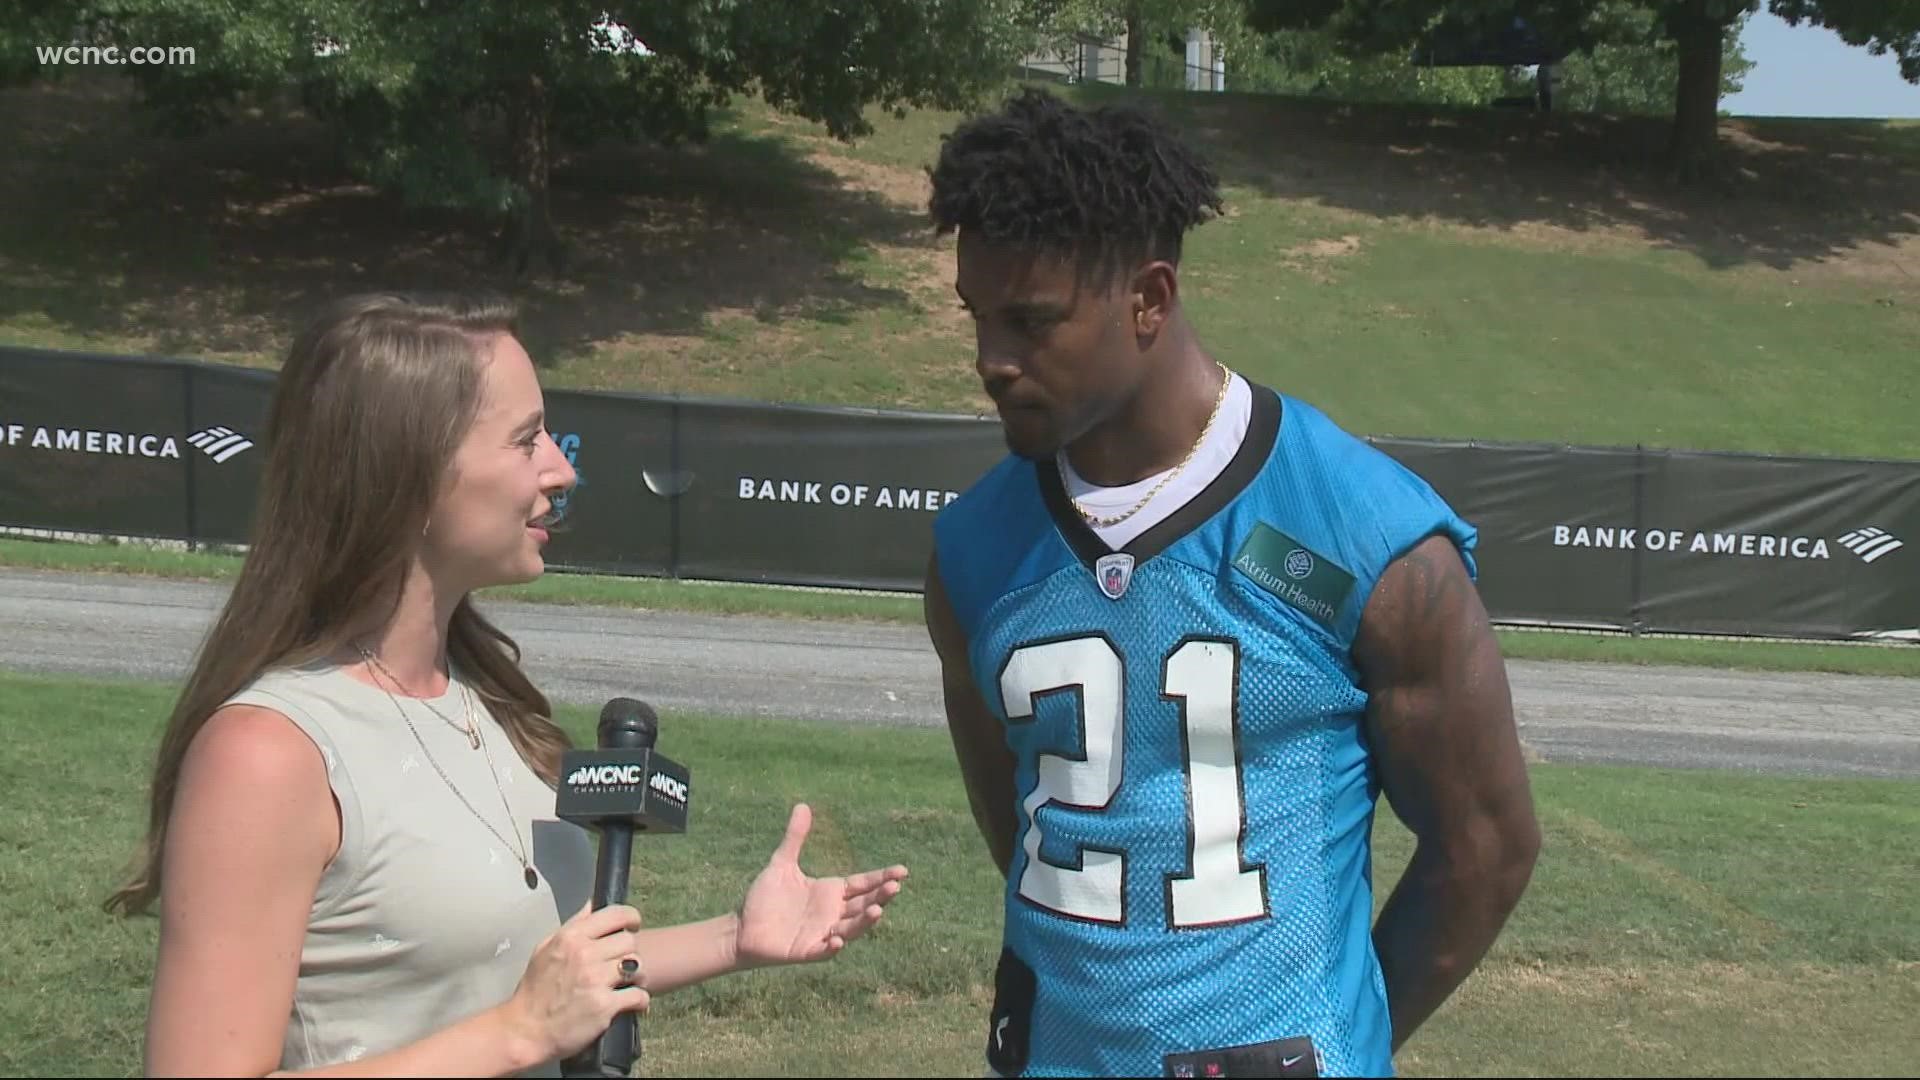 Panthers rising star Jeremy Chinn shares his experience as the season opens with practices.